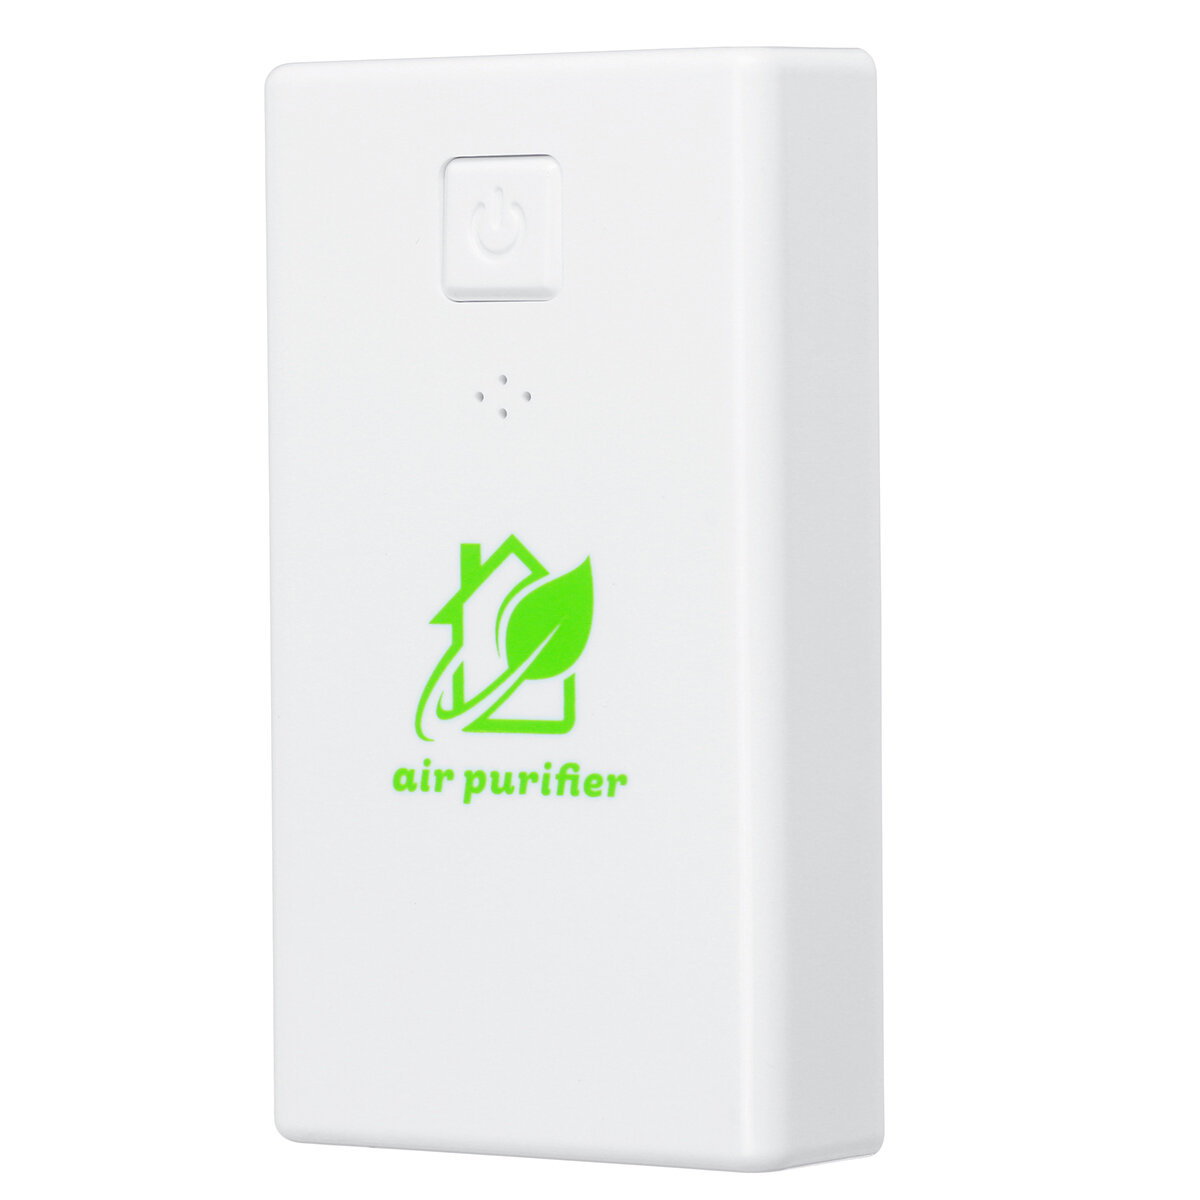 Portable Plug-in Air Purifier Negative Ion Air Purification Remove Formaldehyde Dust Eliminate Odor 